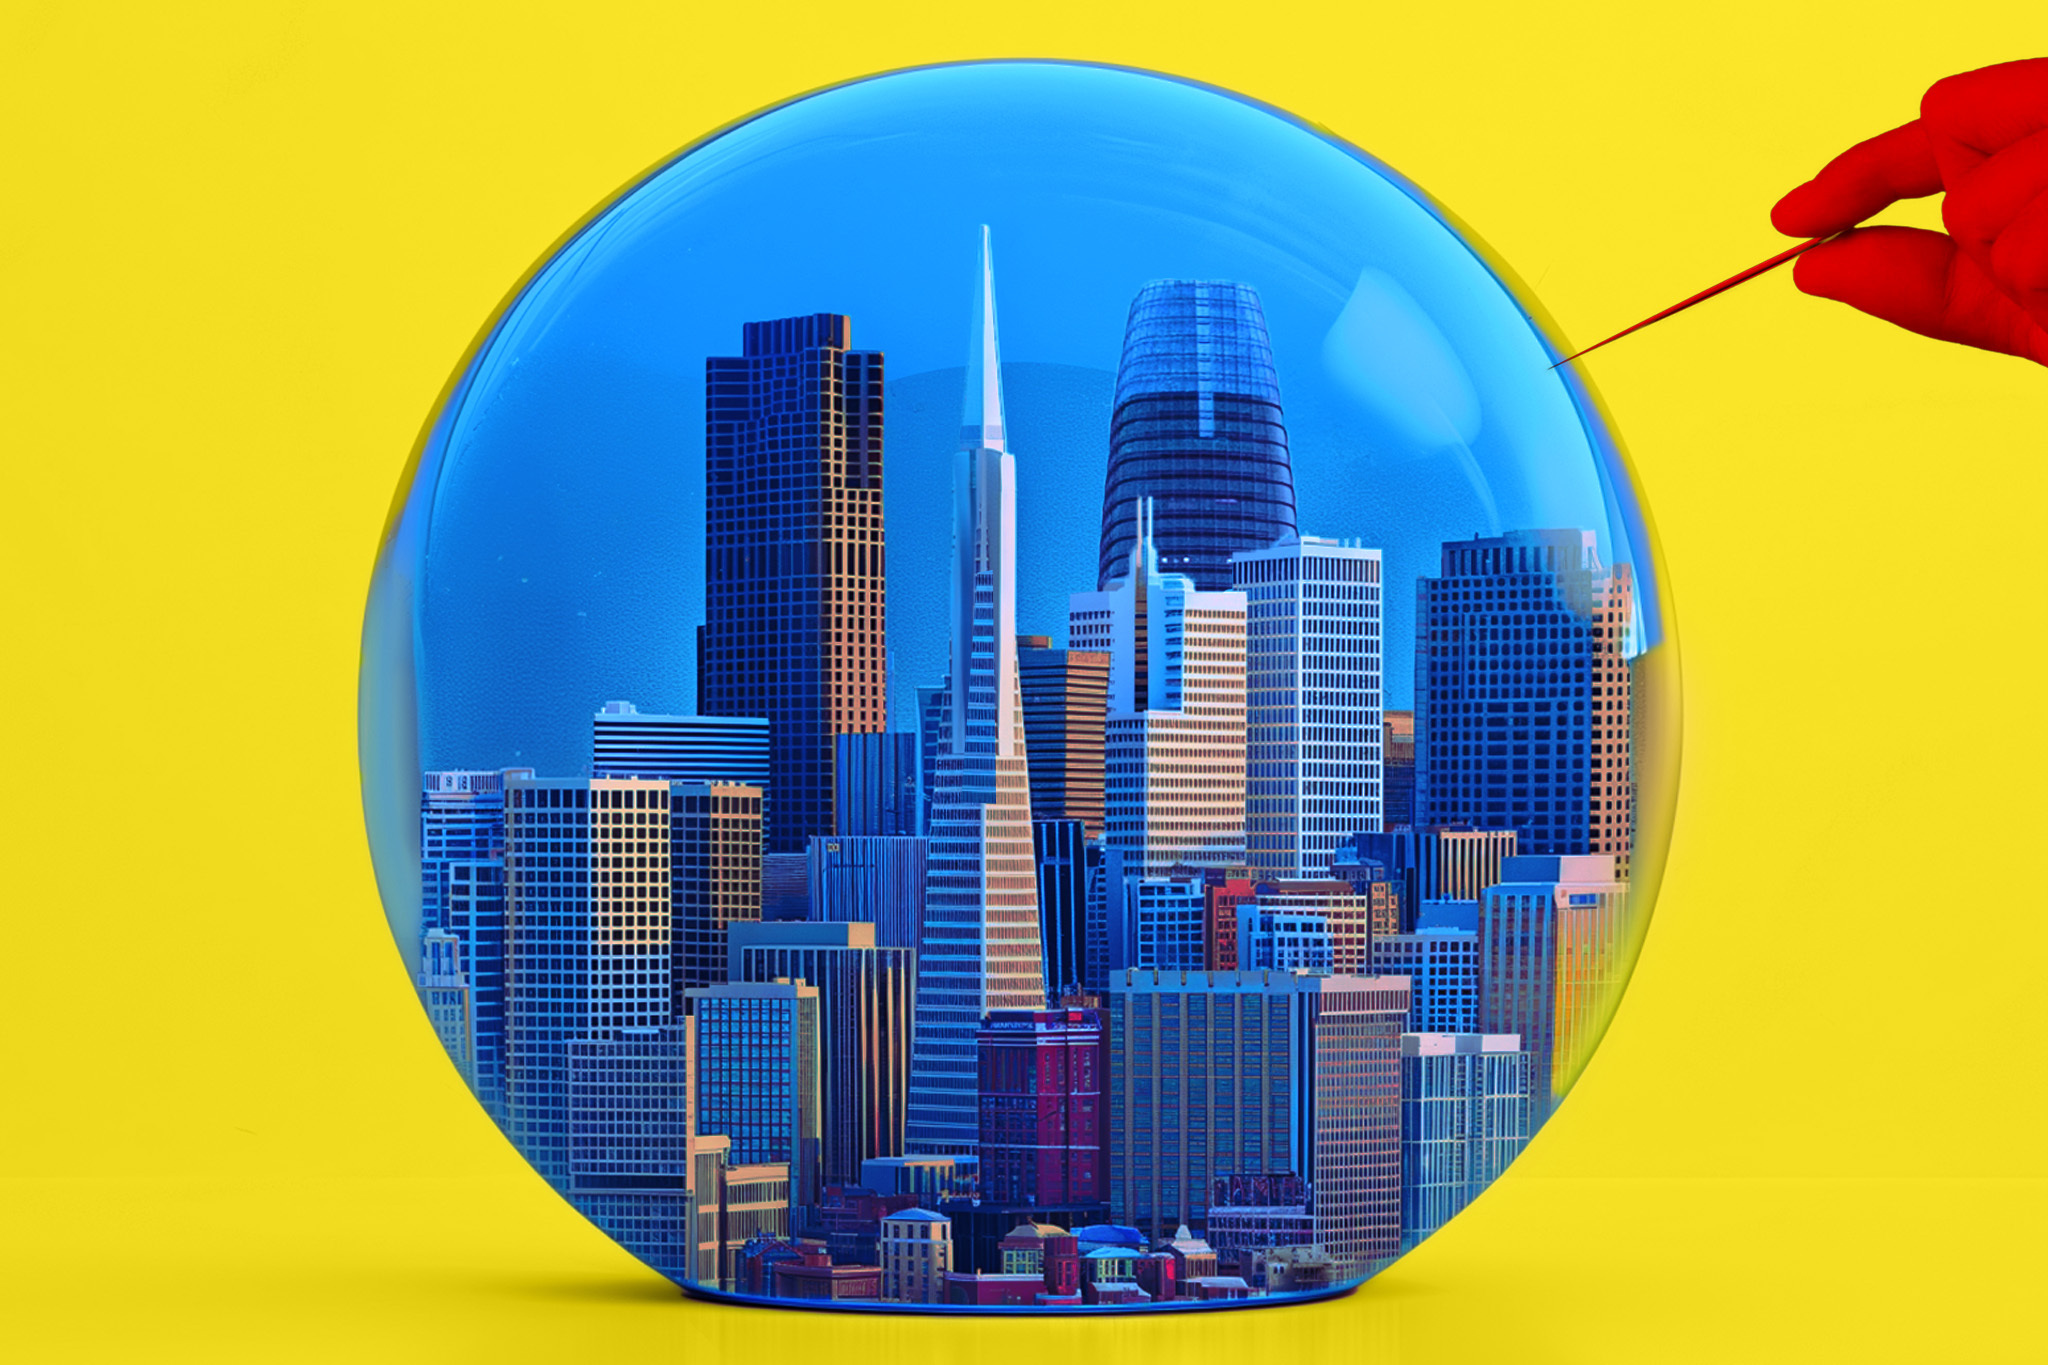 Liberal San Francisco pierced by a conservative bubble